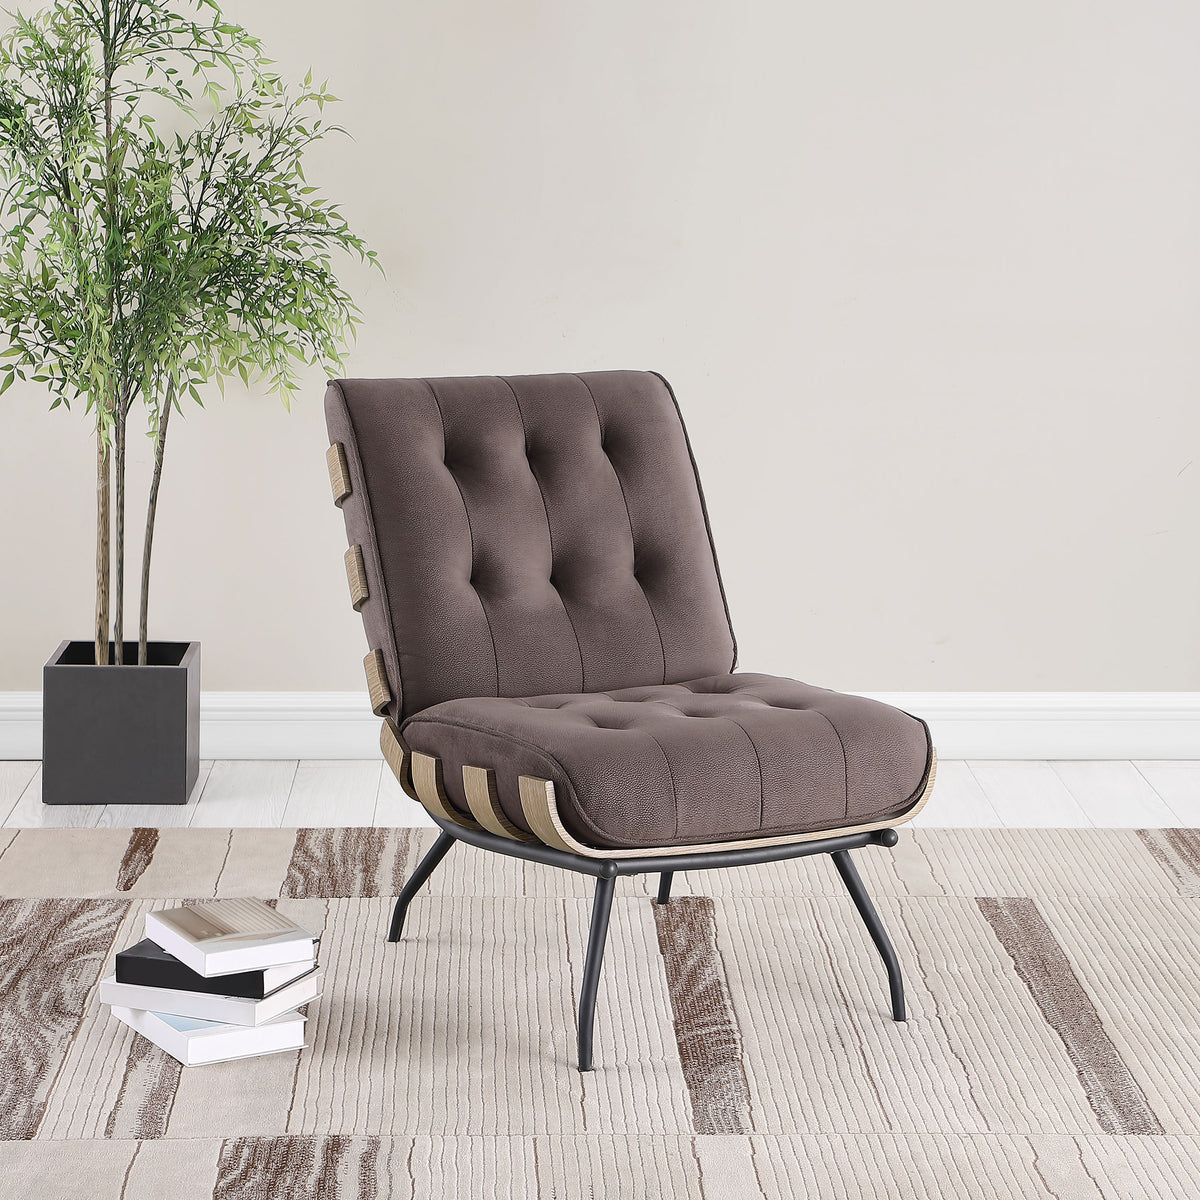 Aloma Armless Tufted Accent Chair - Half Price Furniture